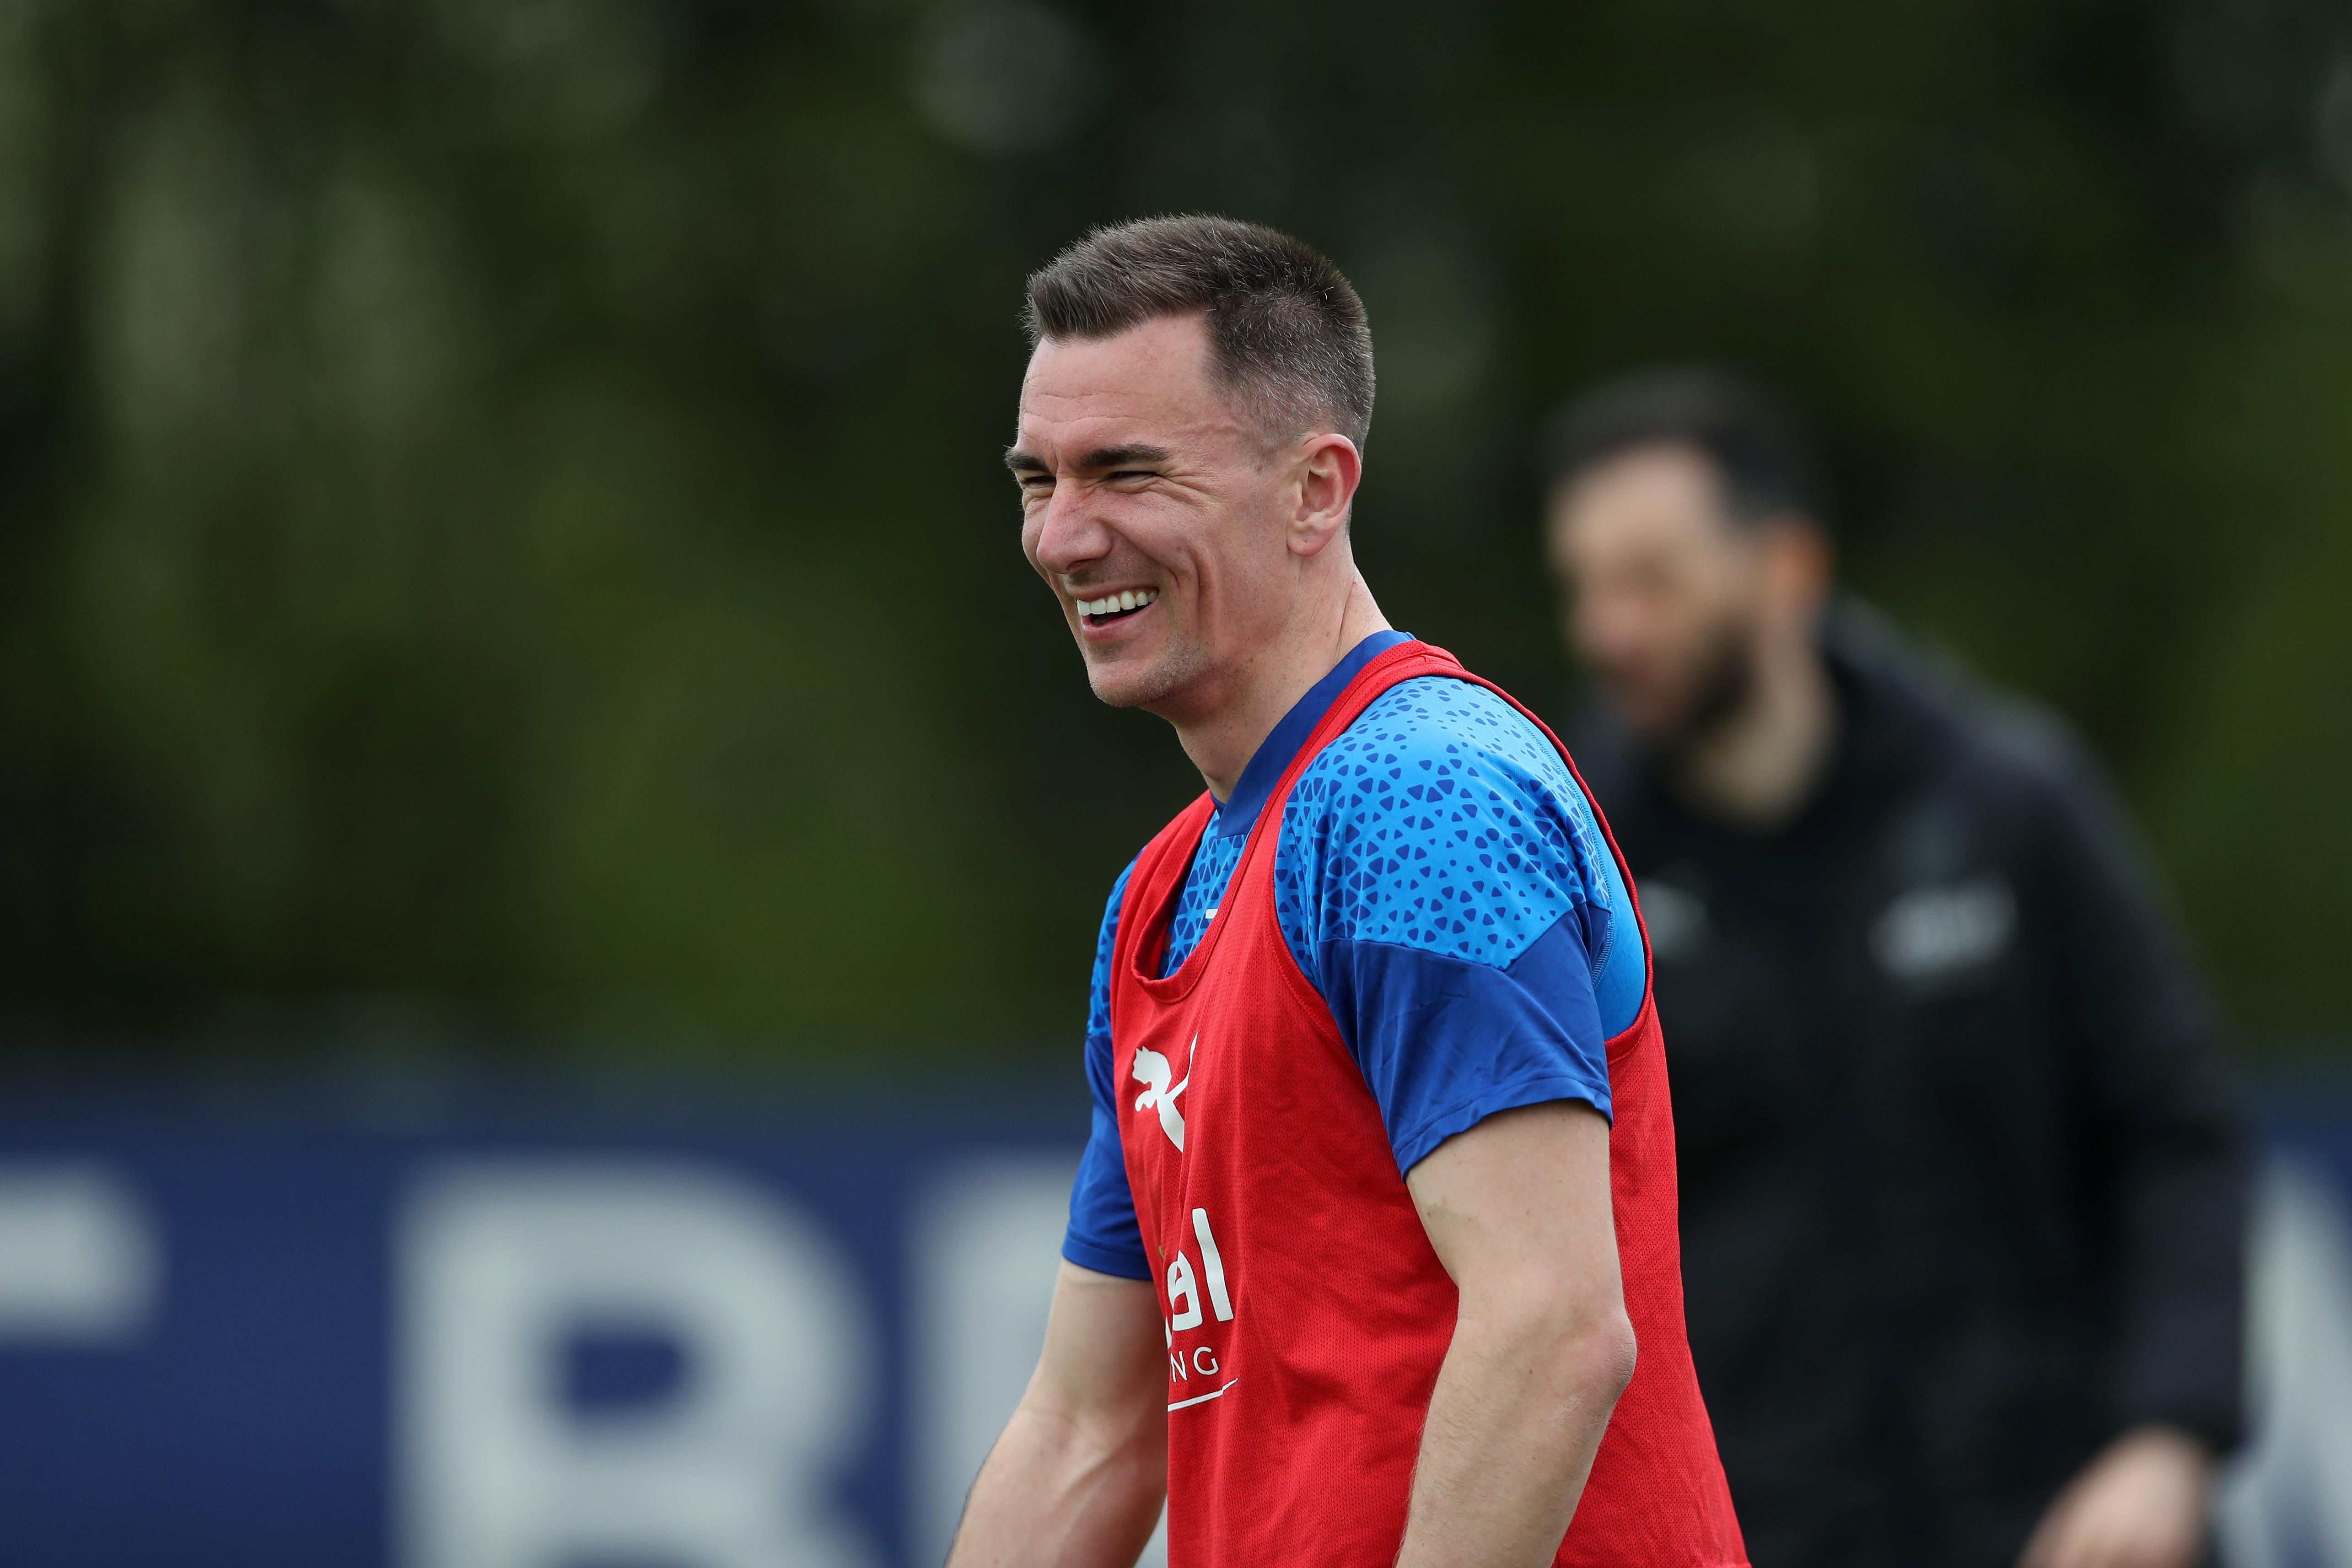 Jed Wallace smiling during a training session